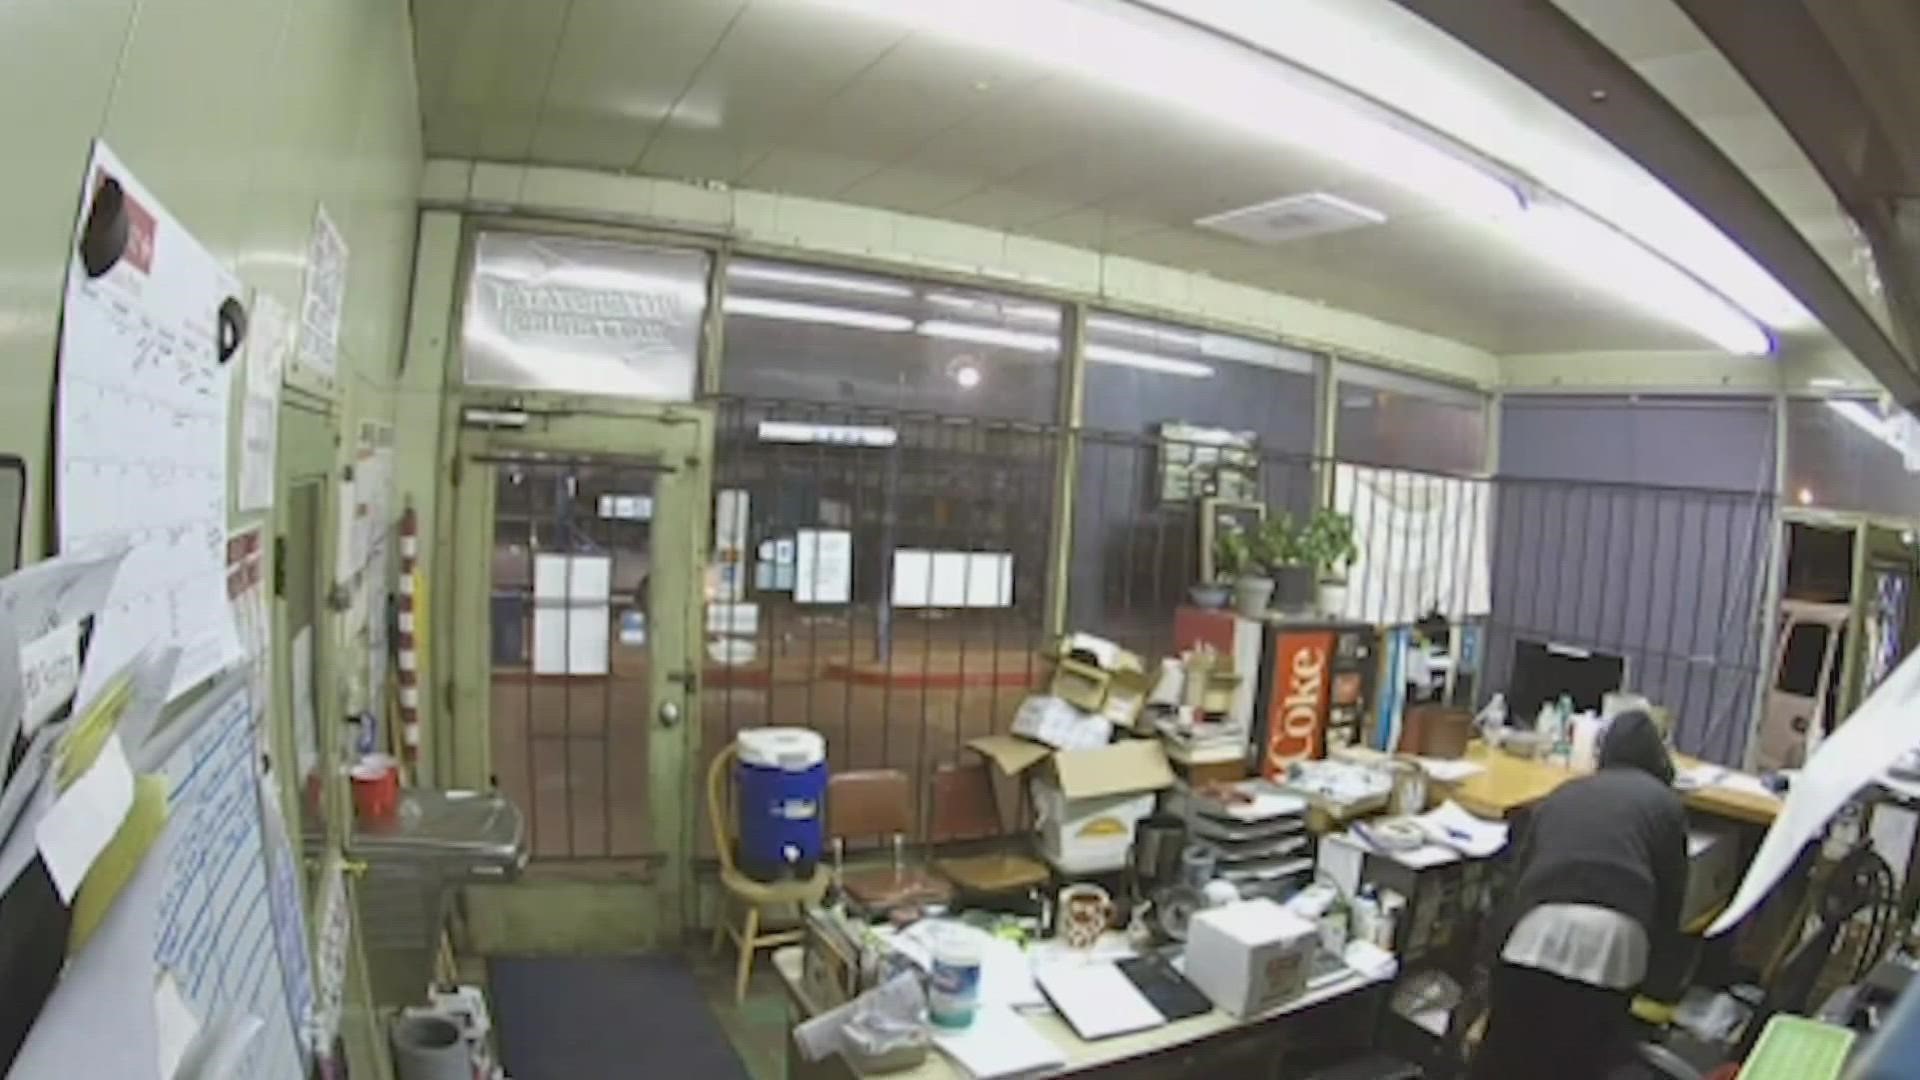 In the 79-second video, two people are seen walking inside the main office, peering through the garage window, opening the cash register and taking off with money.